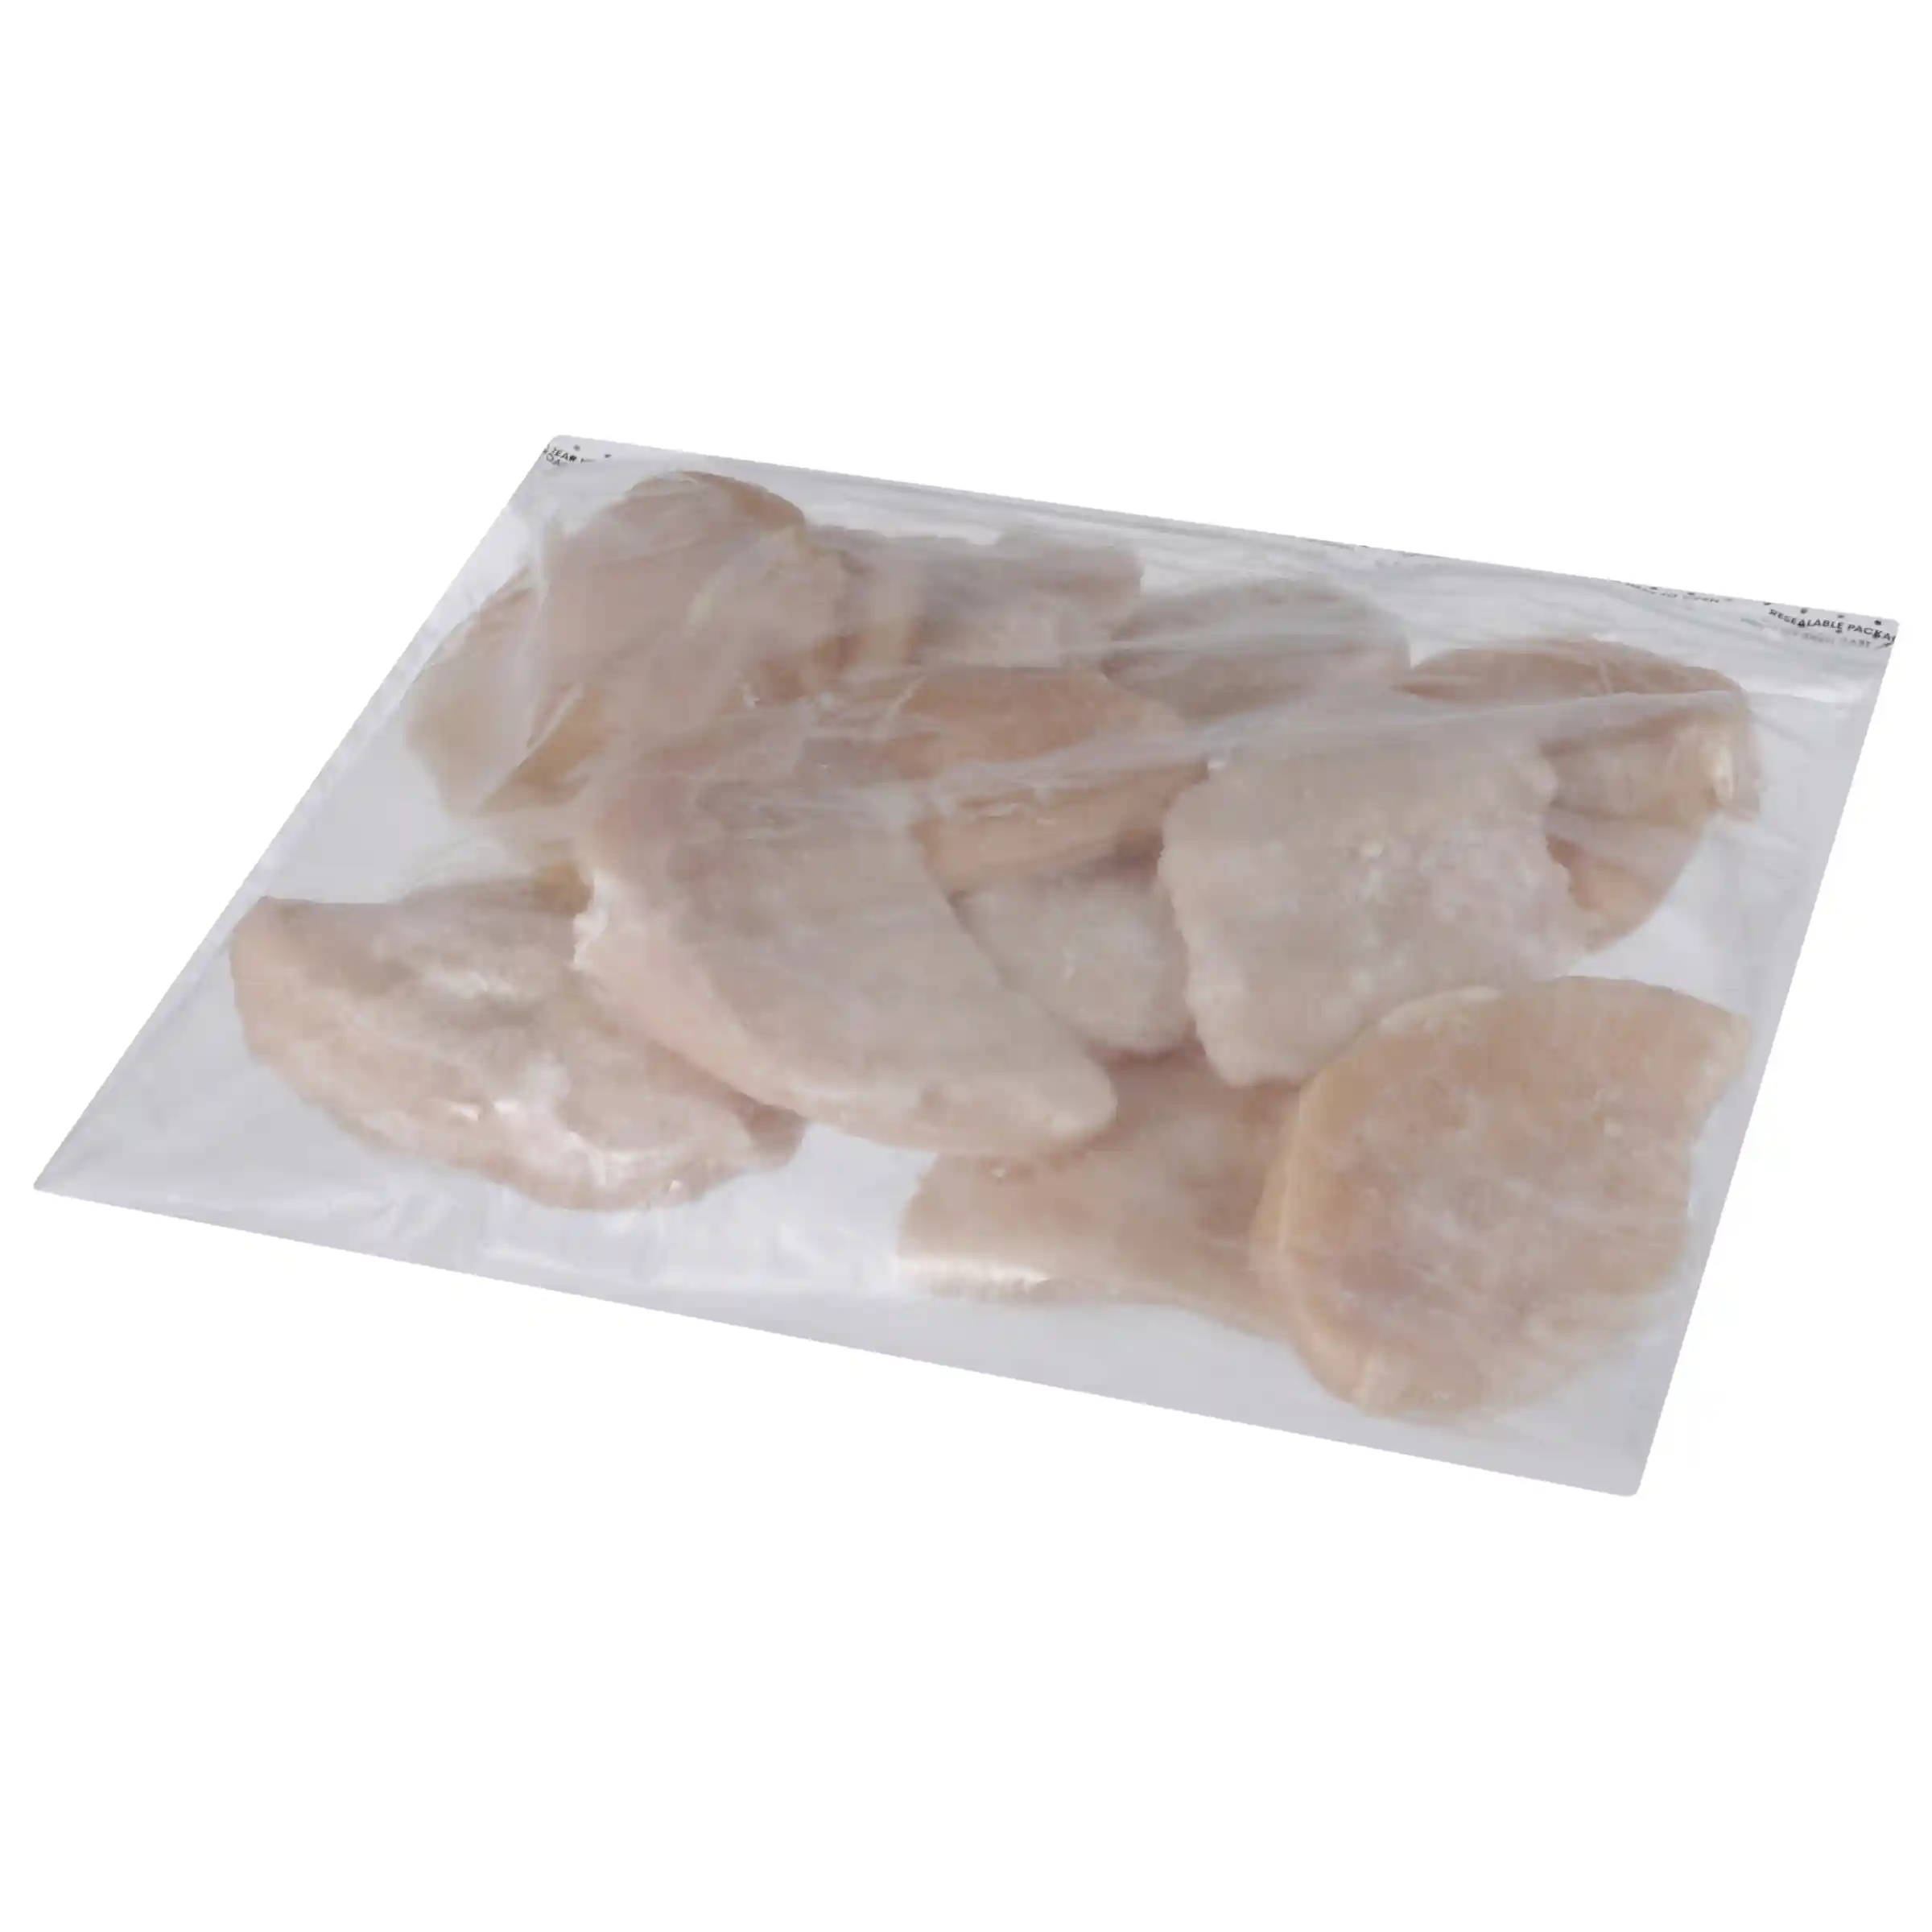  Tyson® Uncooked, Ice Glazed Boneless Skinless Chicken Breast Filets with Rib Meat_image_21